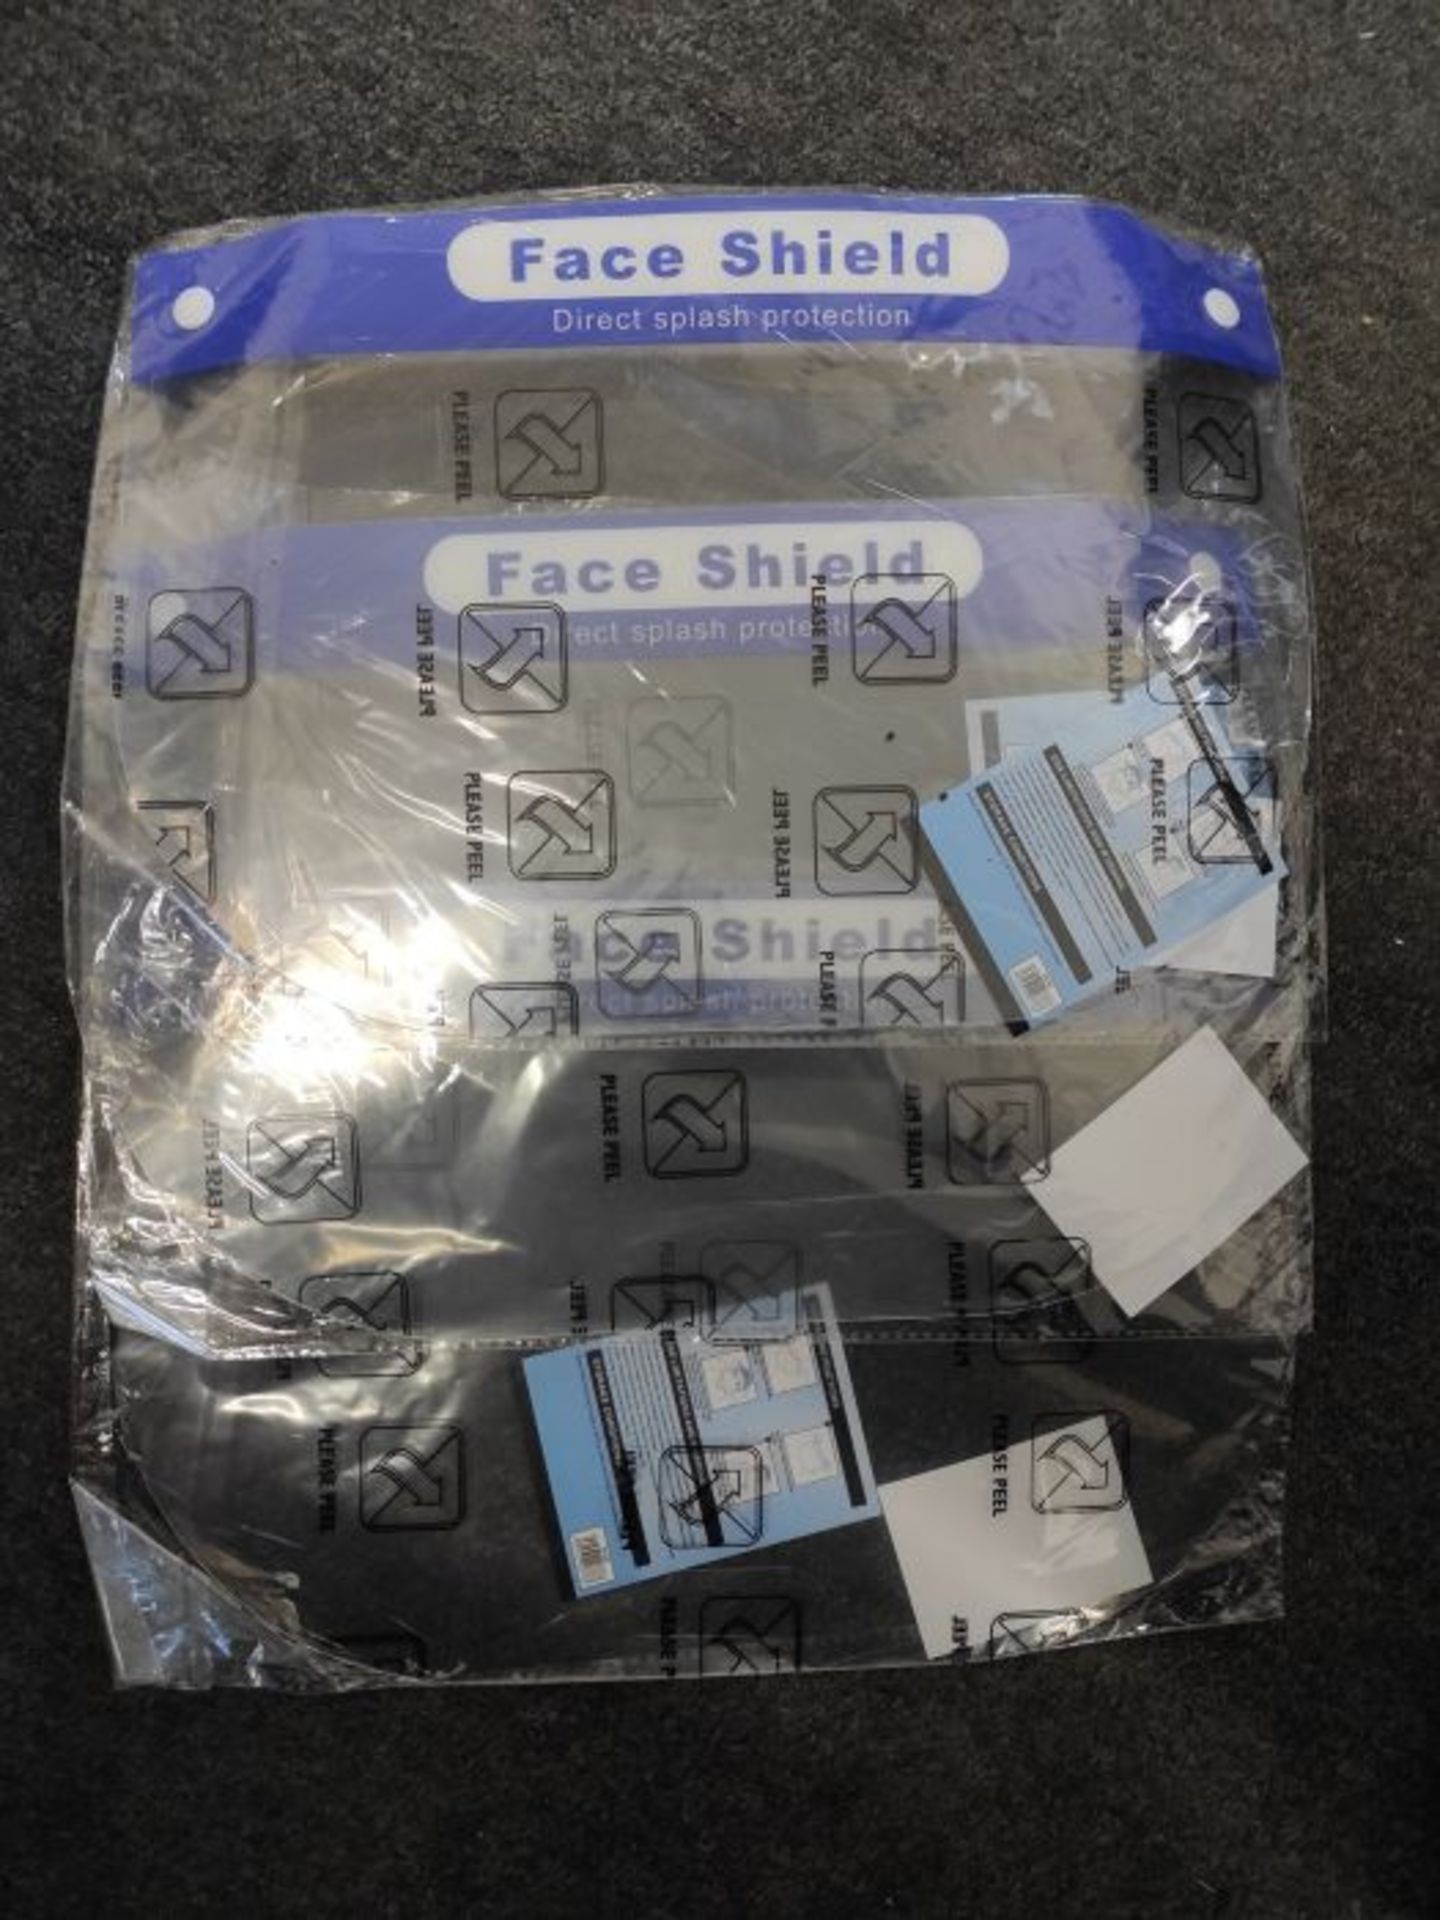 KEPLIN 5pk Transparent Face Safety Shield Full Protection Cap Wide Visor, Quick & Easy - Image 2 of 2